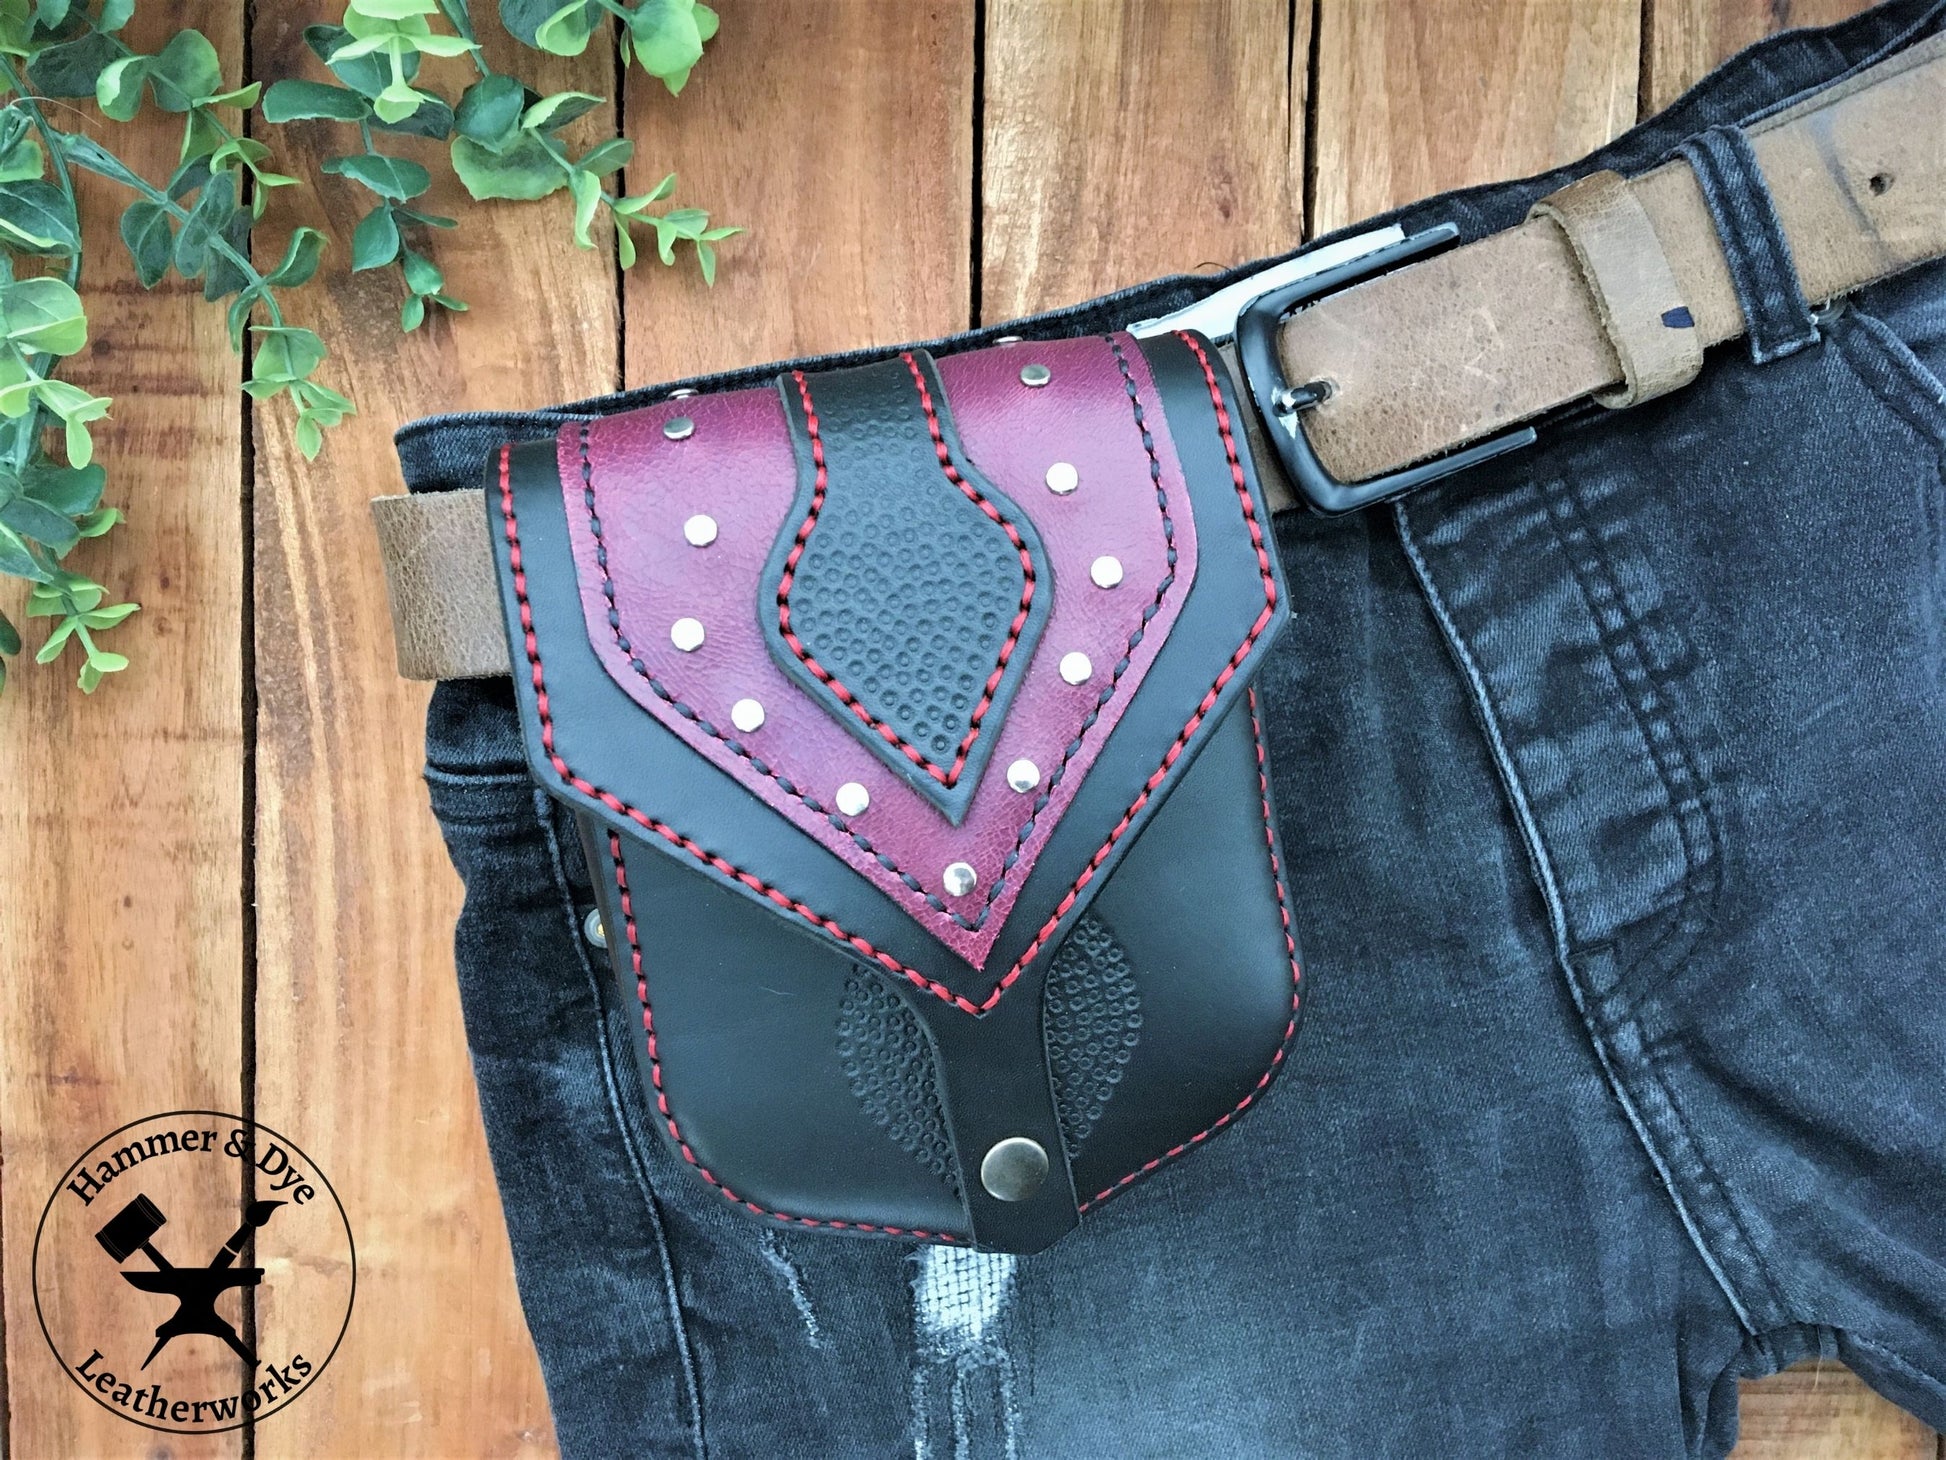 Handmade Two-tone Studded Leather Belt Bag in Black and Purple on a trouser Belt